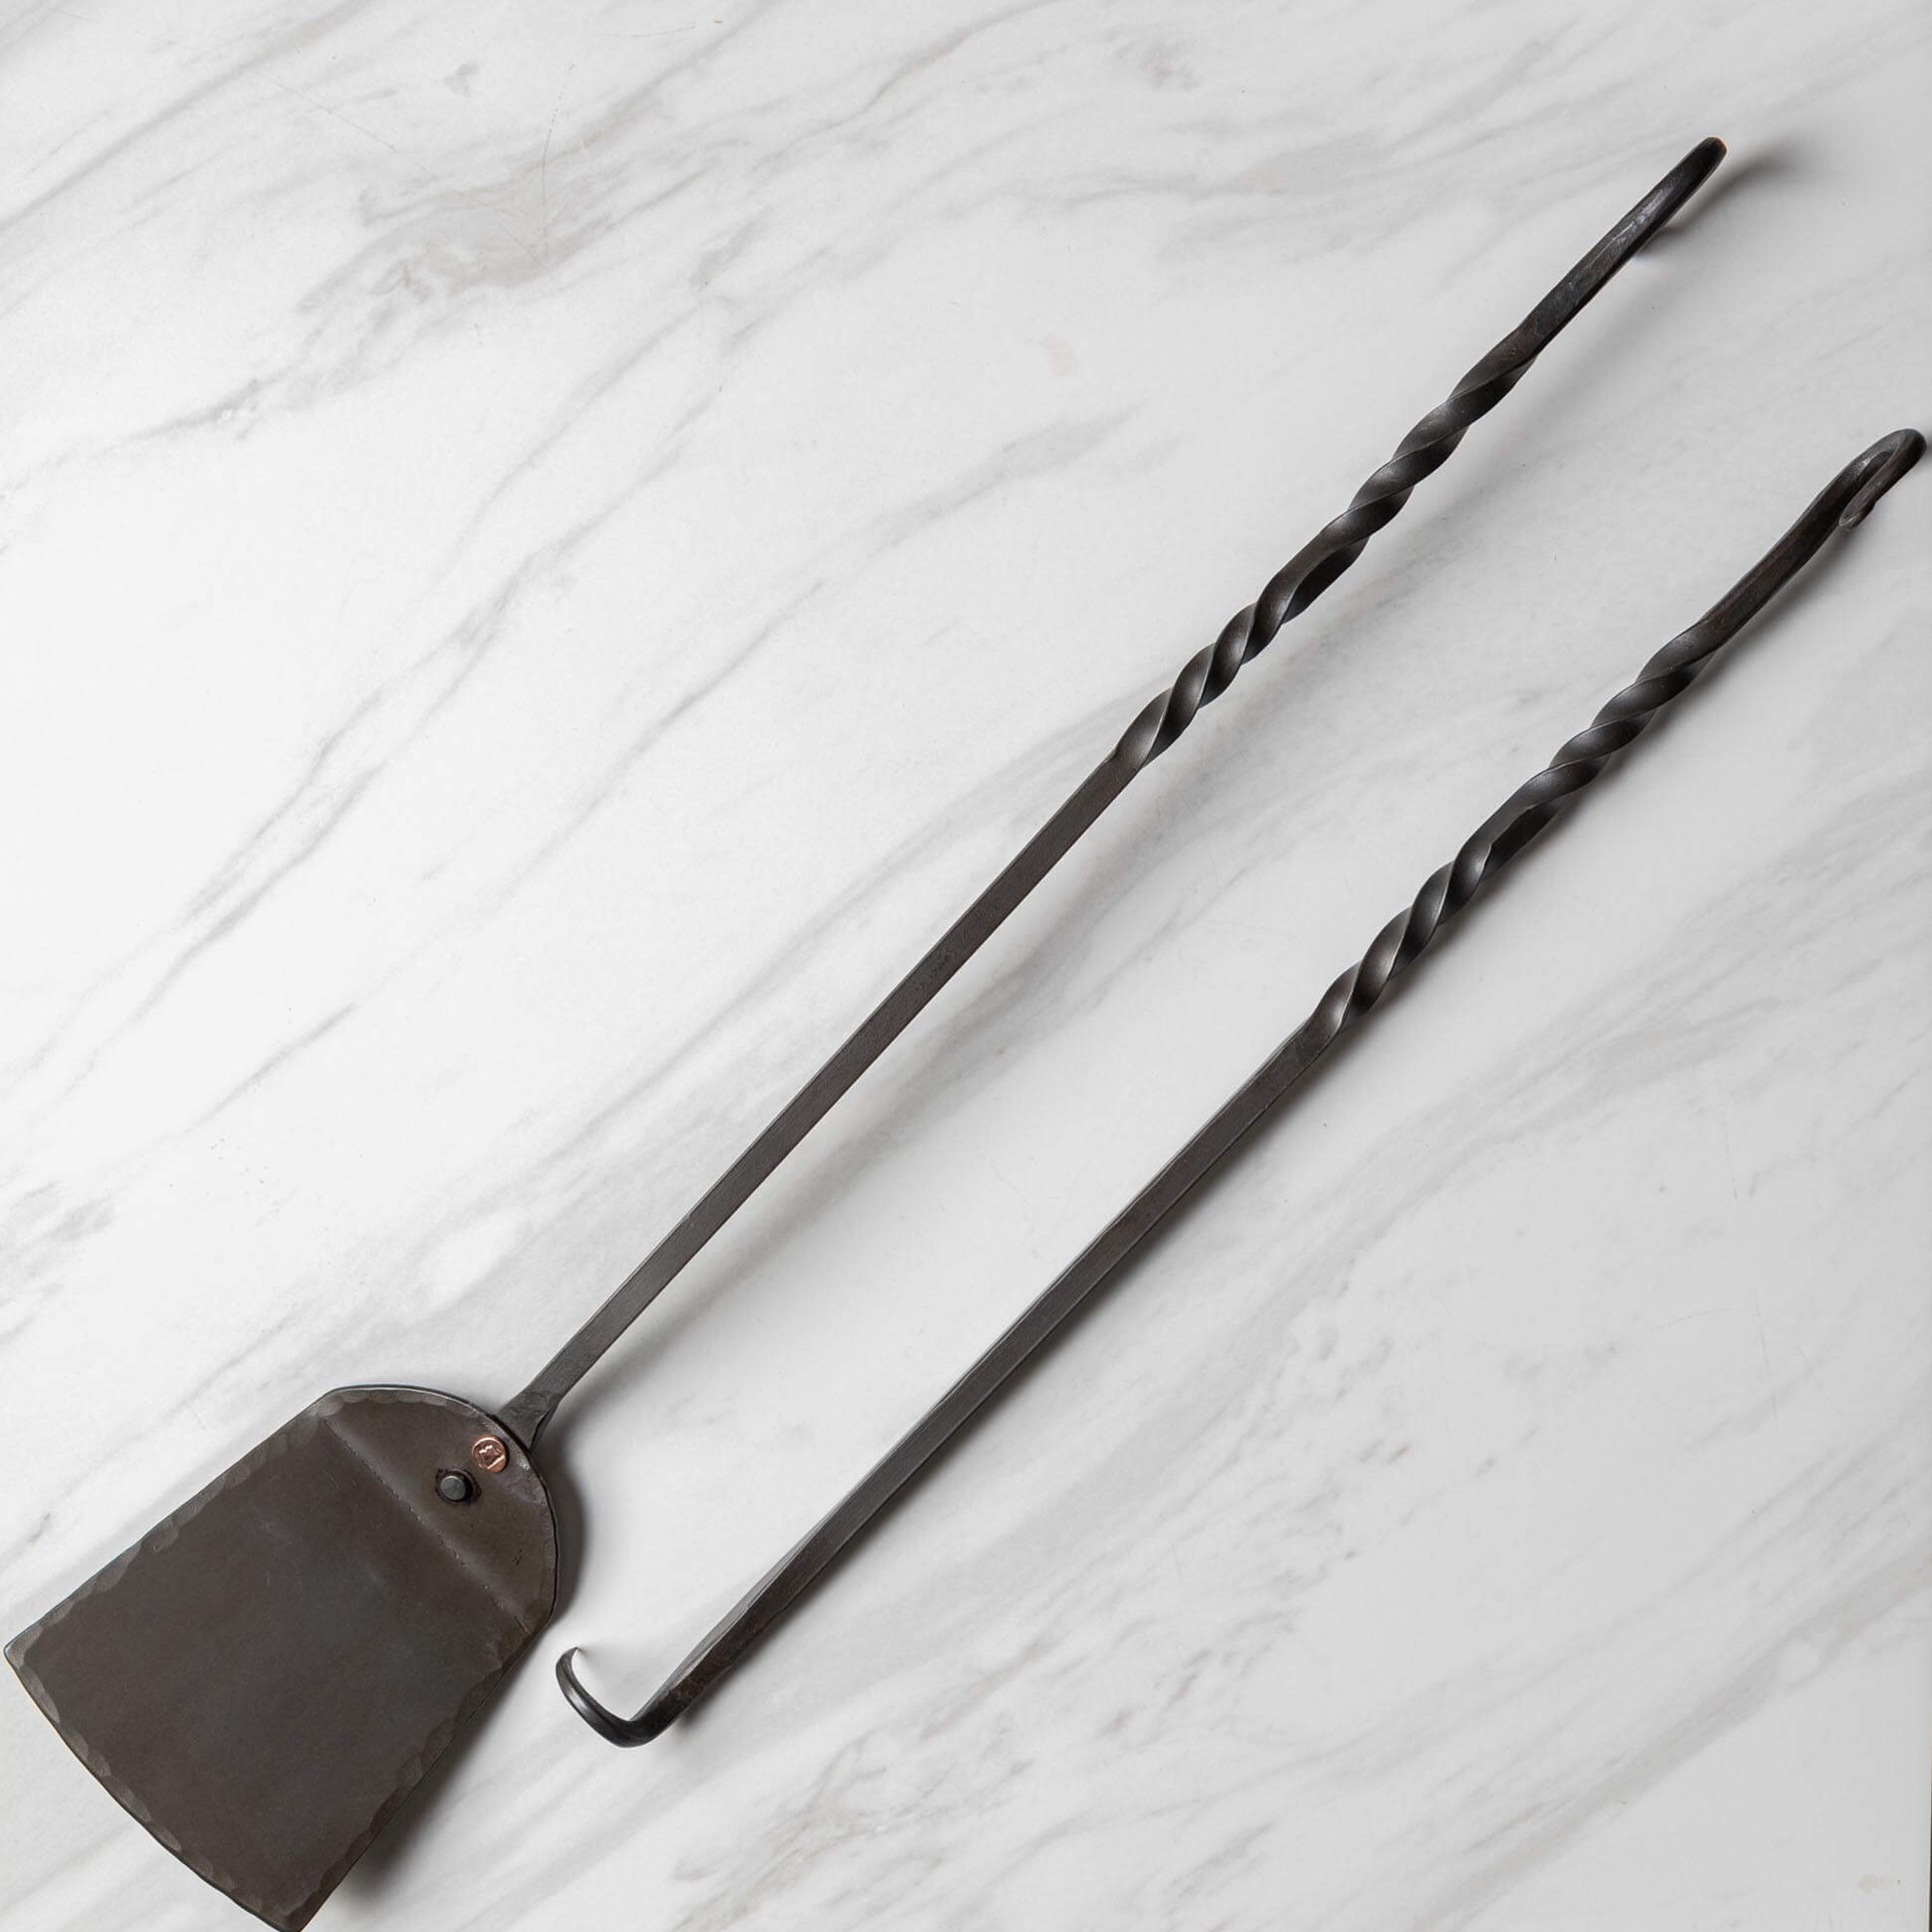 Grill Master Spatula and Steak Flipper Set - Hand Forged